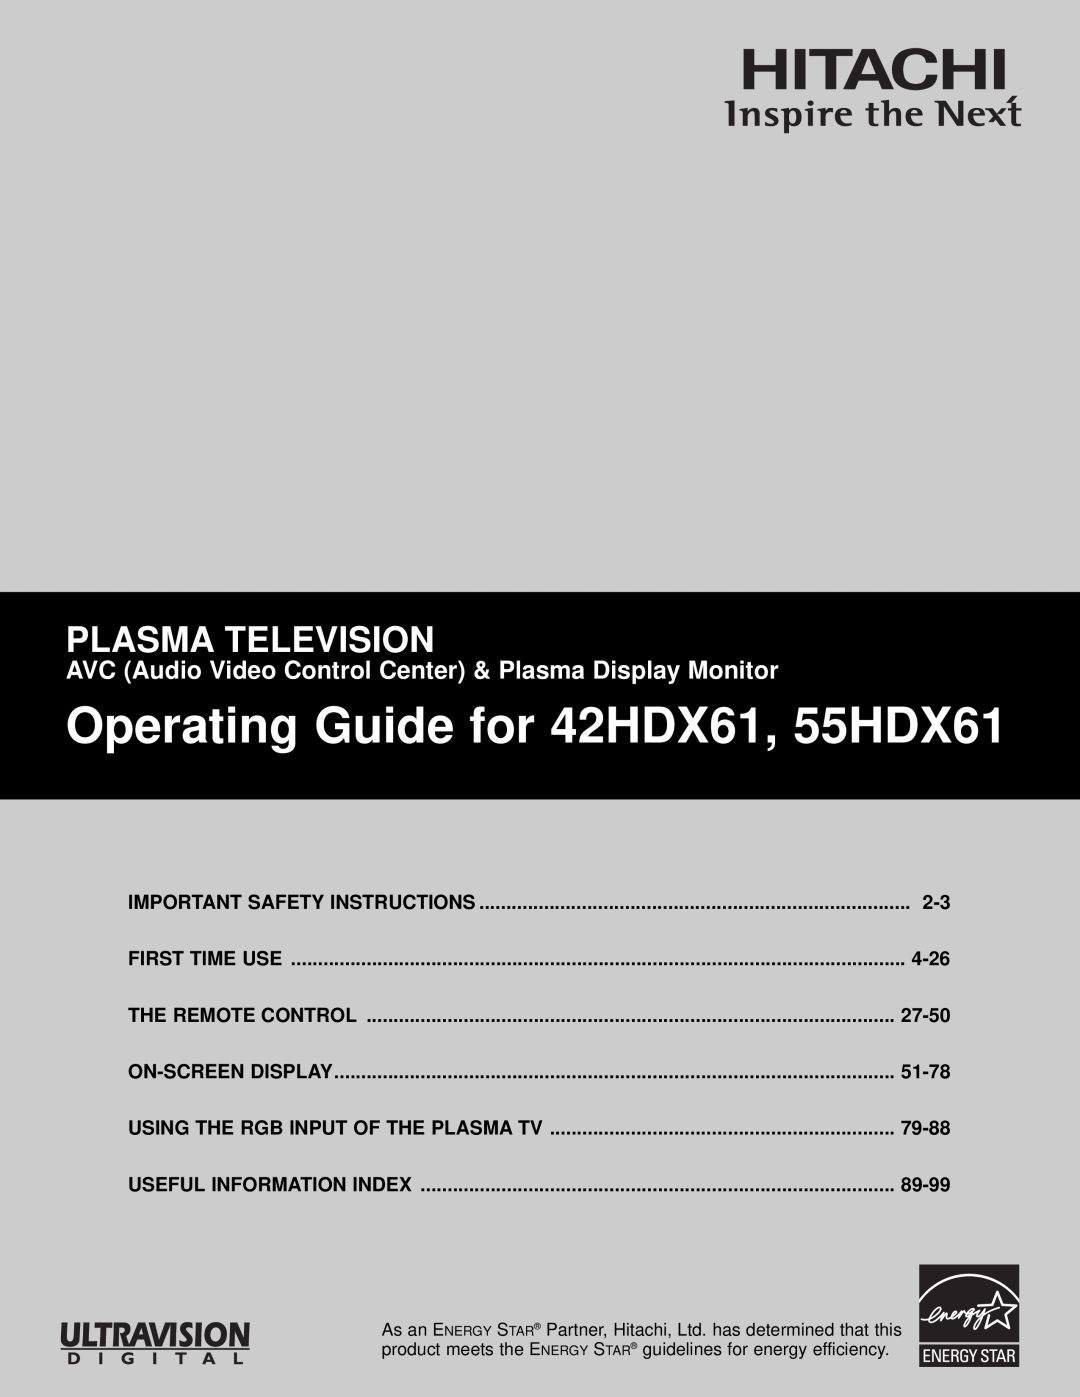 Hitachi important safety instructions Operating Guide for 42HDX61, 55HDX61, Plasma Television 